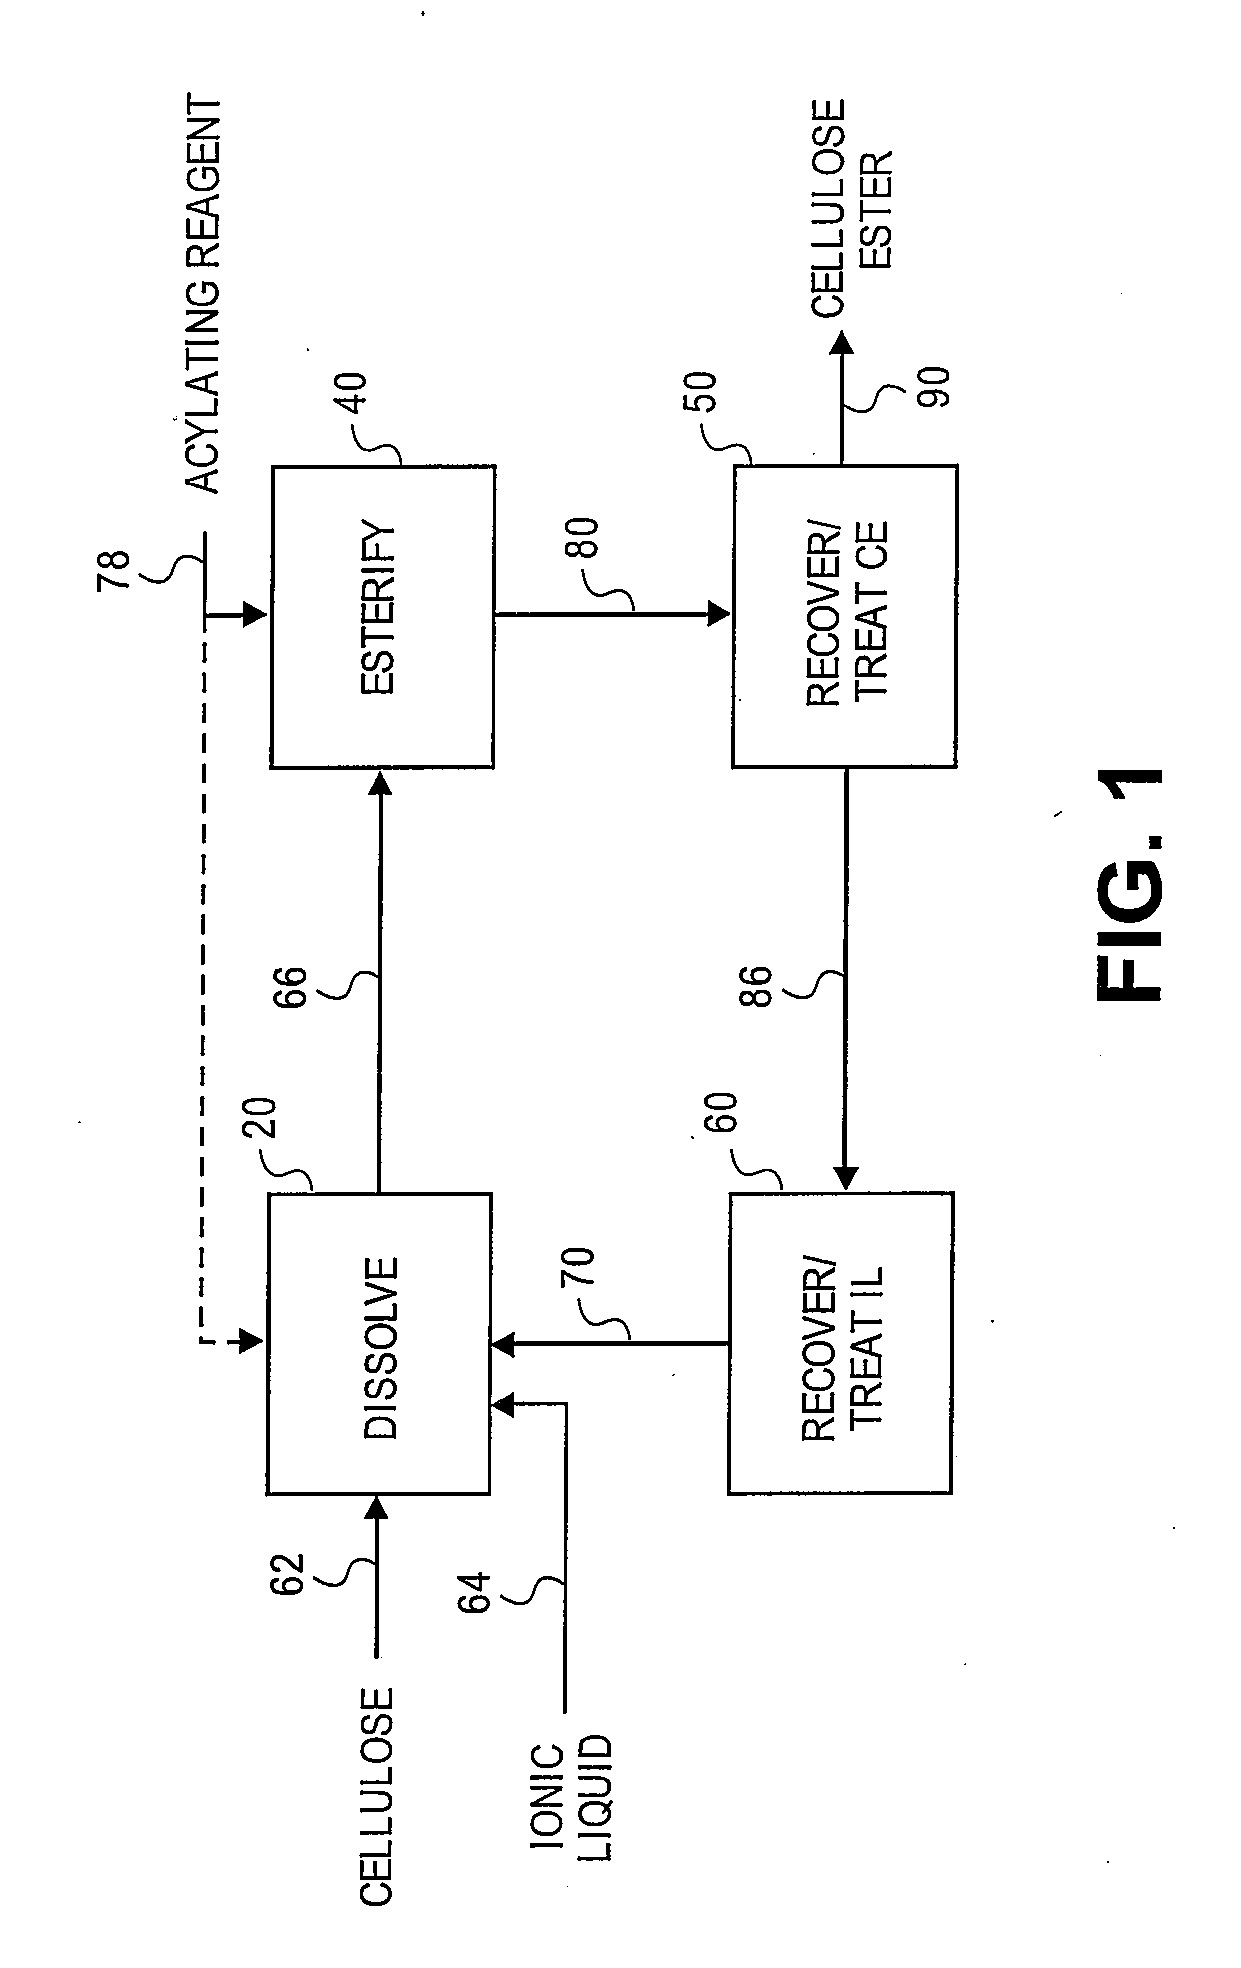 Regioselectively substituted cellulose esters produced in a carboxylated ionic liquid process and products produced therefrom